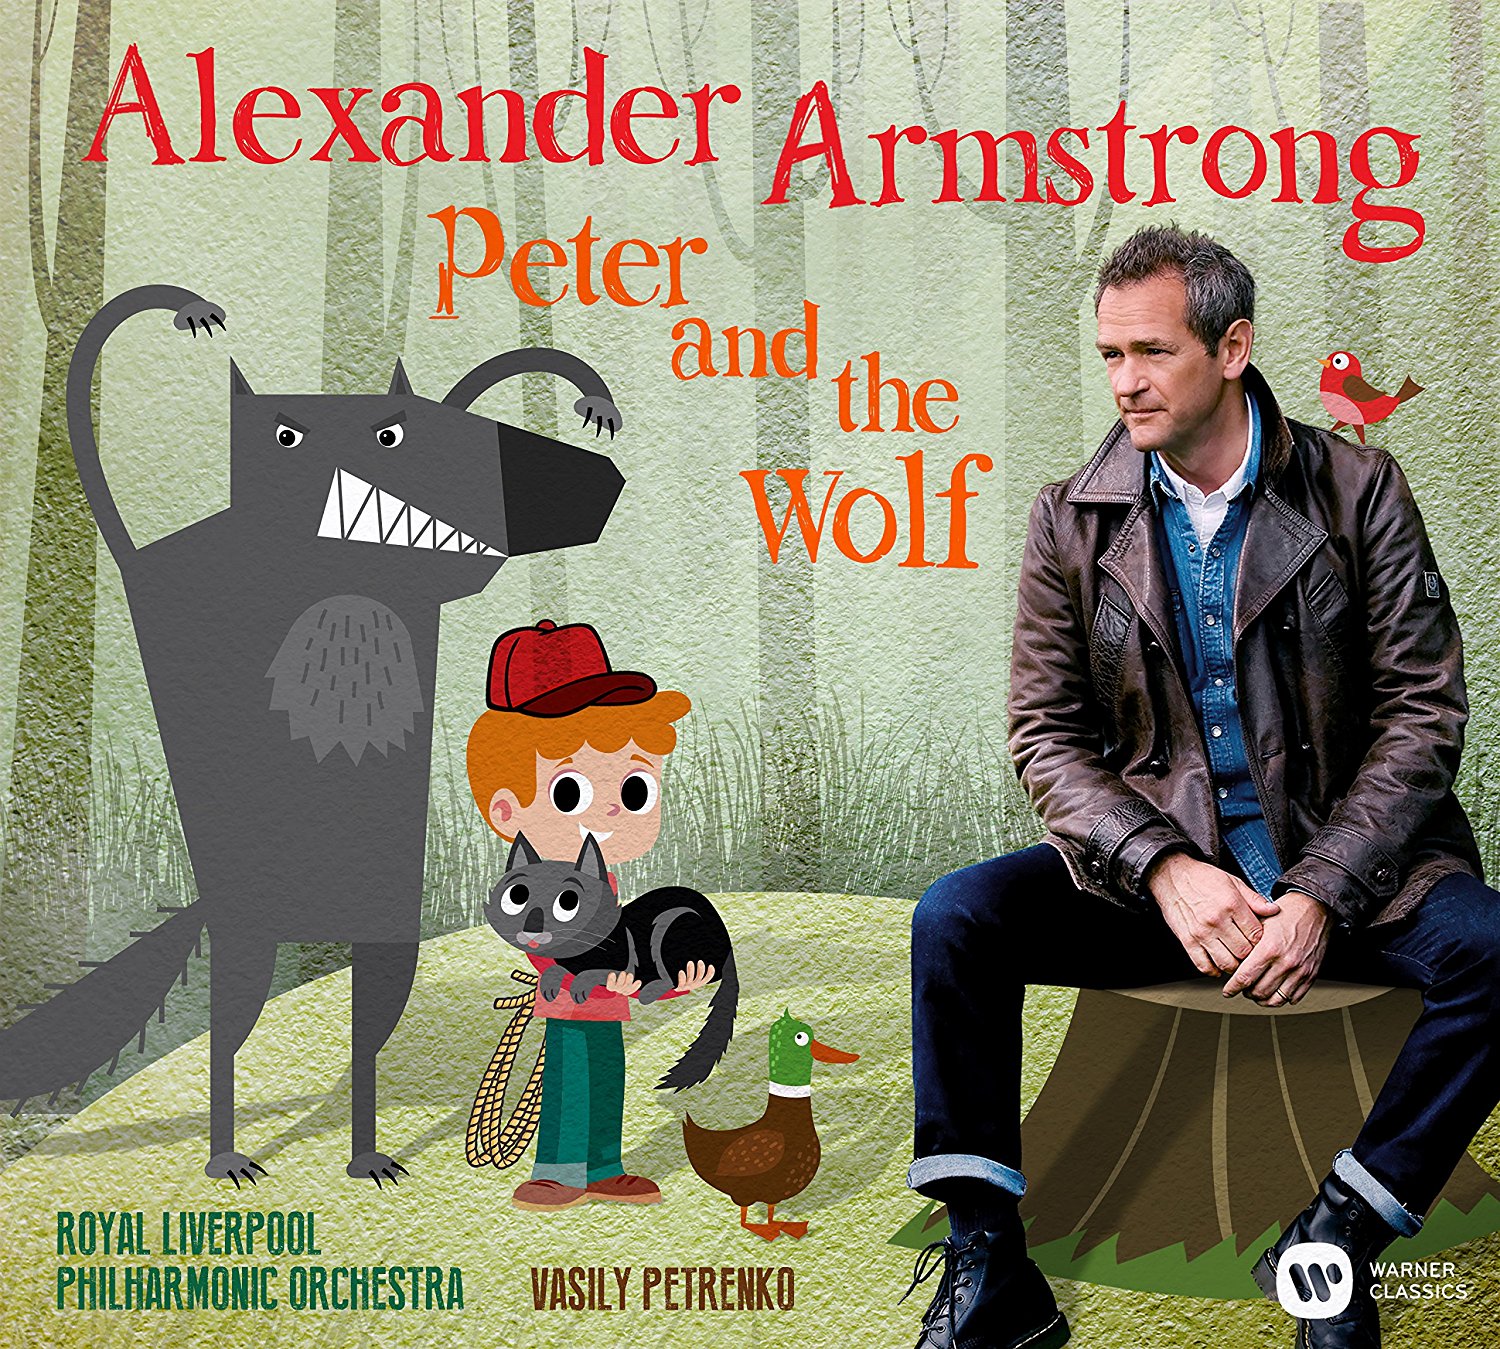 Alexander Armstrong Peter and the Wolf